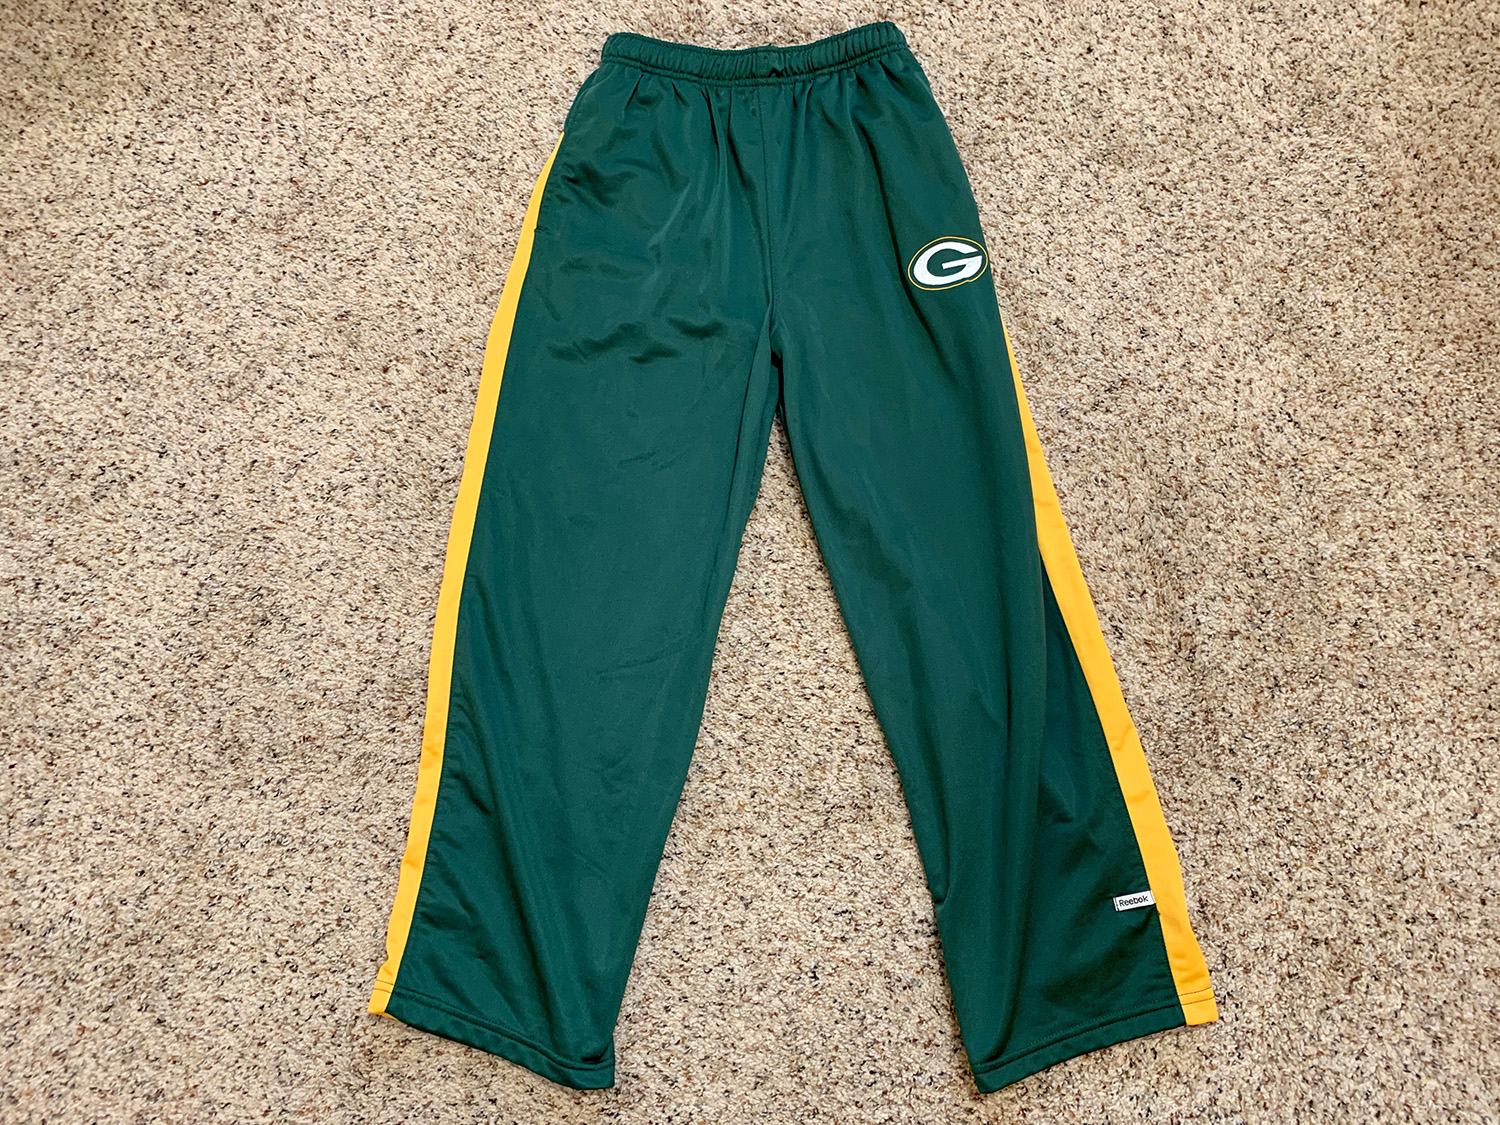 Reebok NFL Team Apparel Youth Green Bay Packers Logo Pants Size L